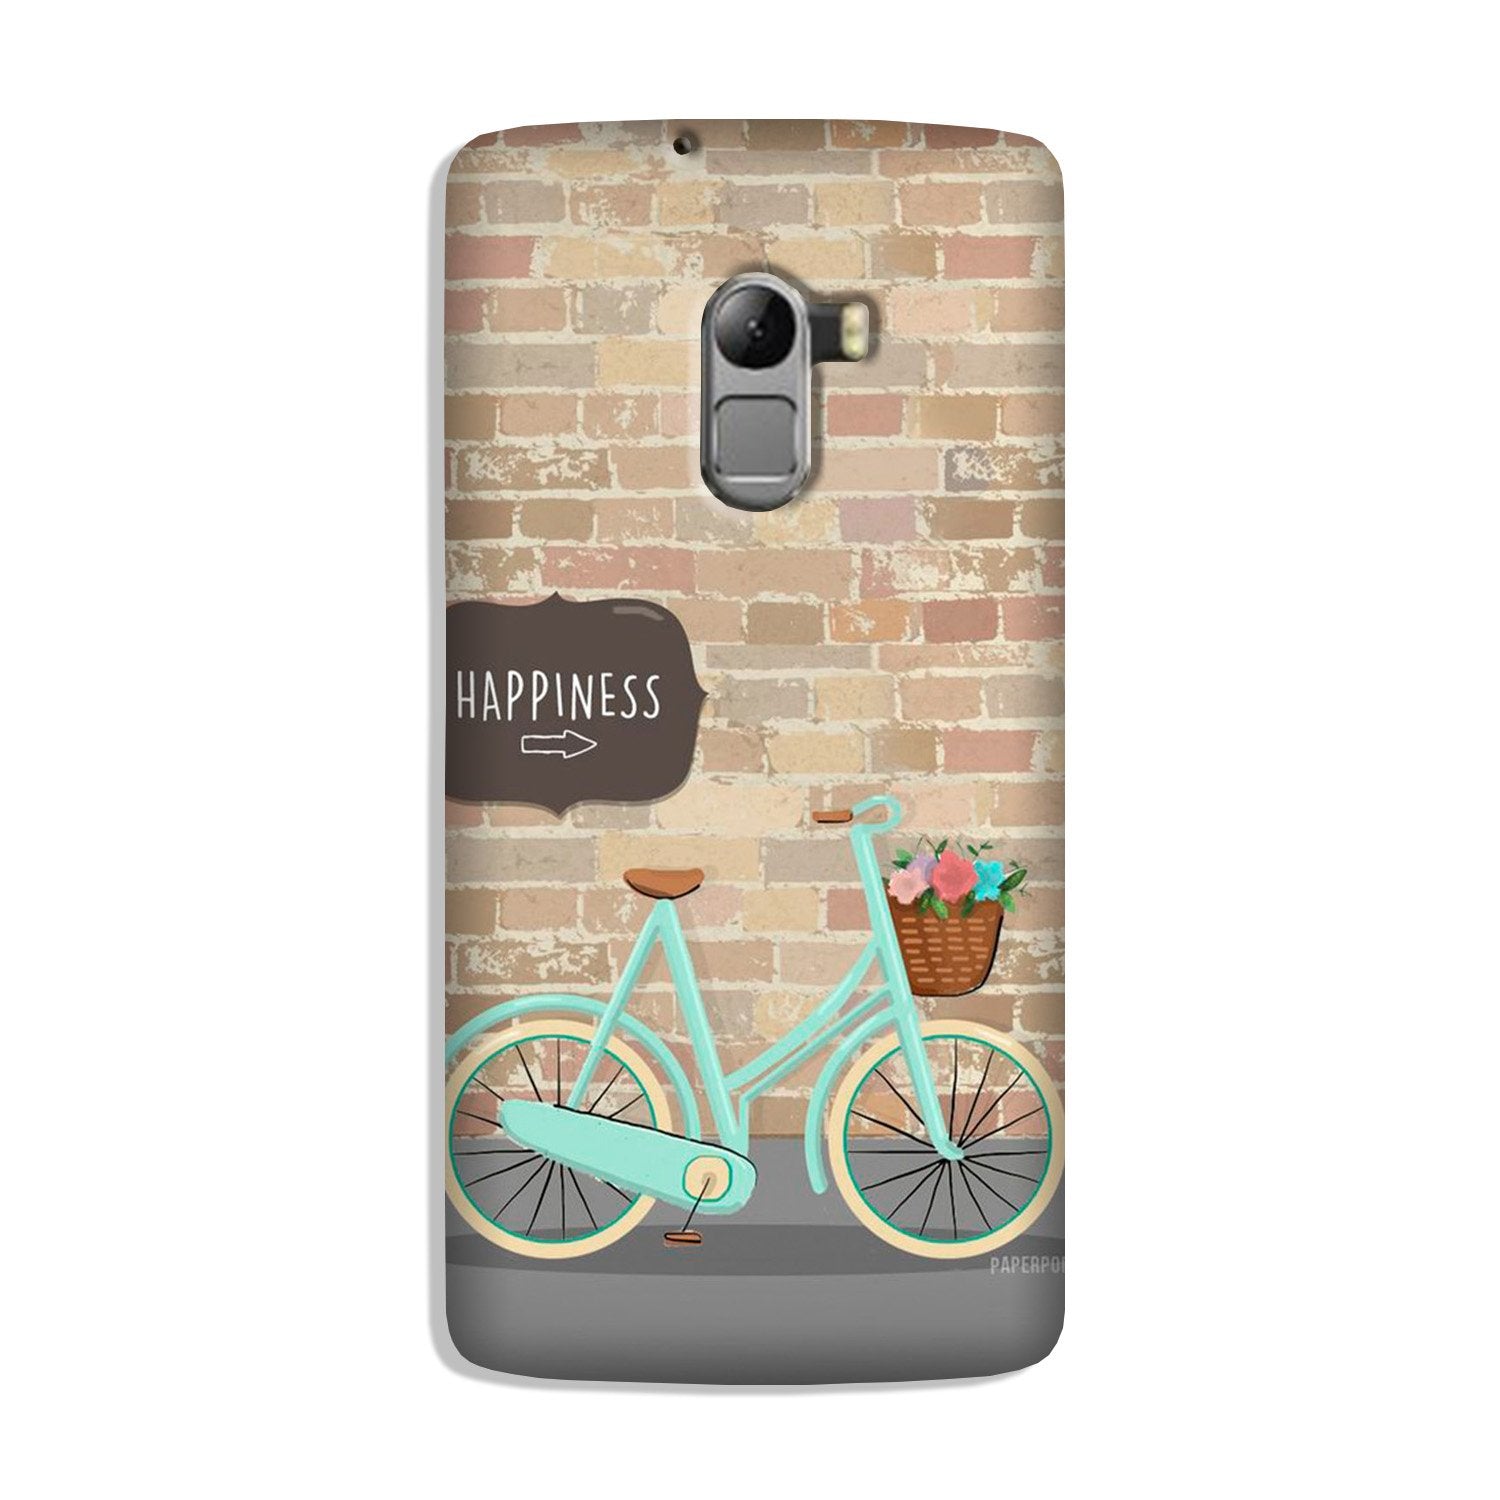 Happiness Case for Lenovo K4 Note